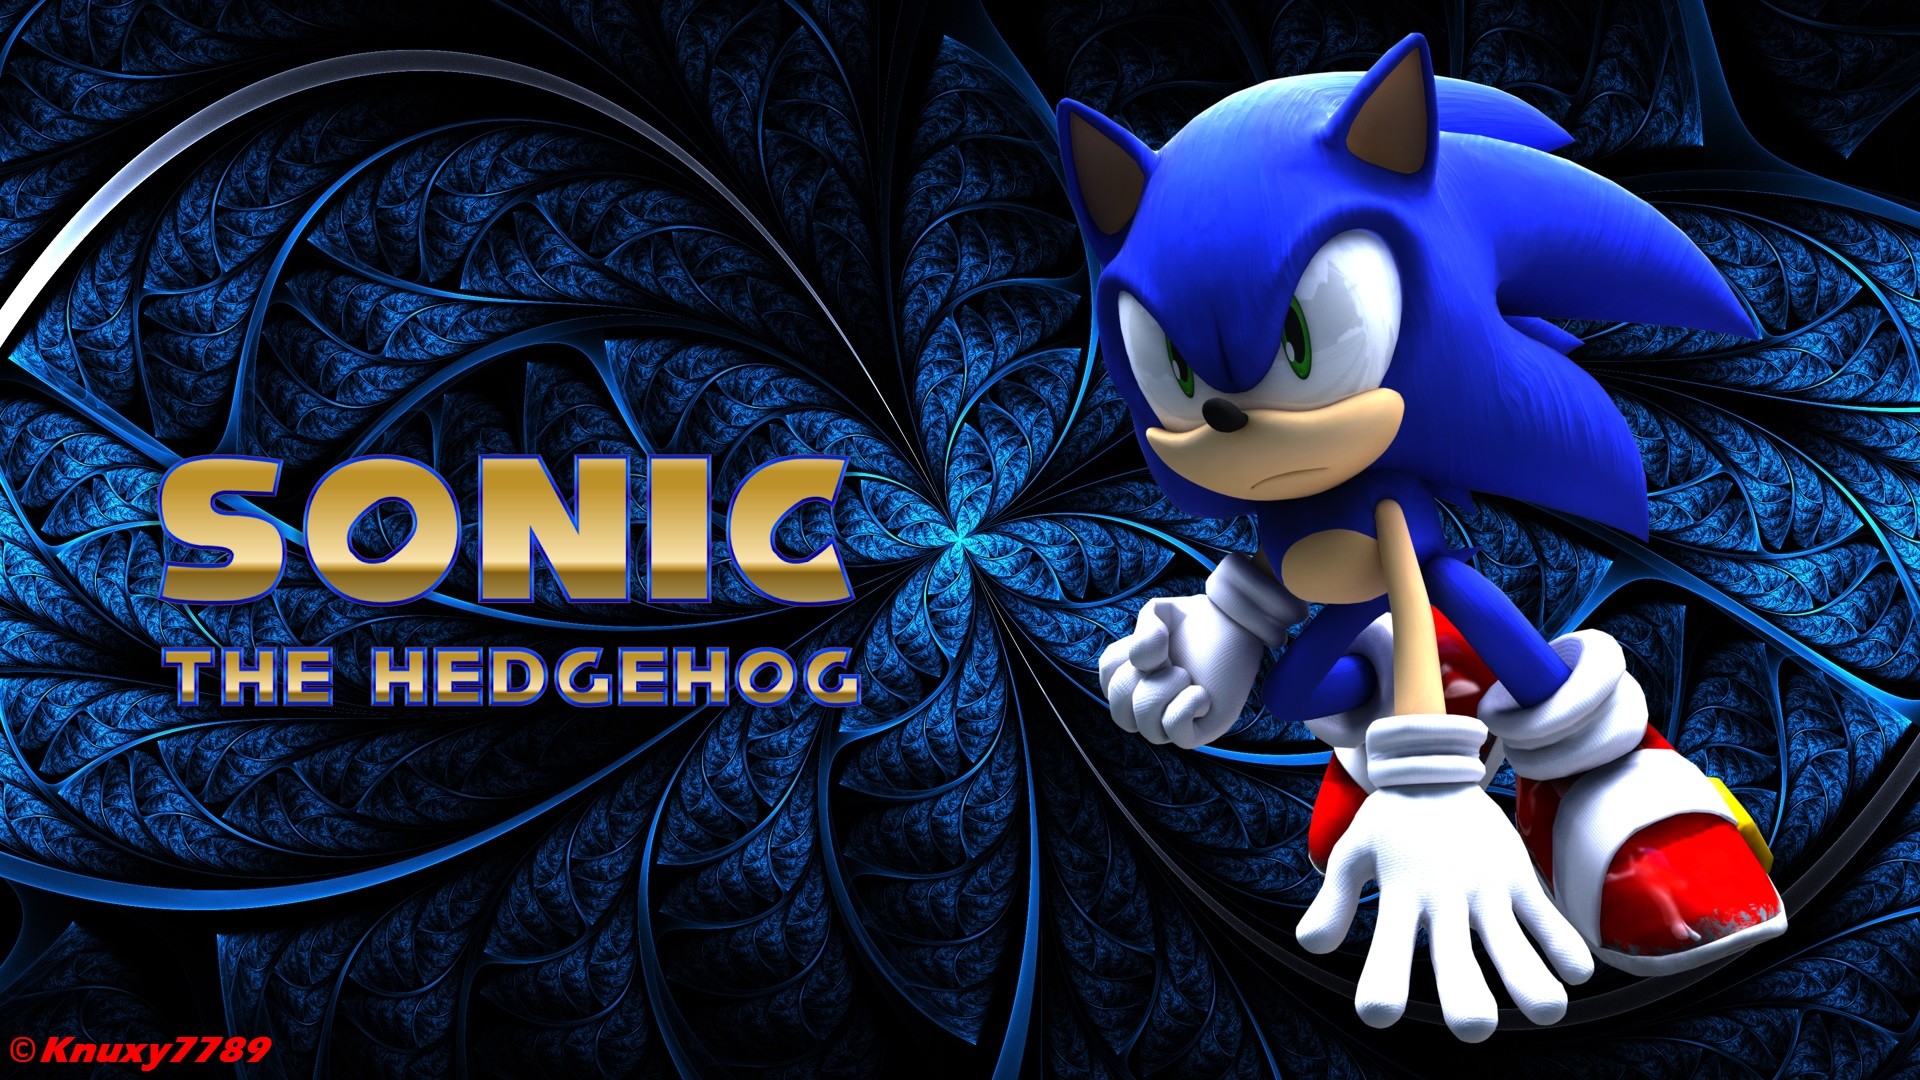 Sonic the Hedgehog – Wallpaper3 by Knuxy7789